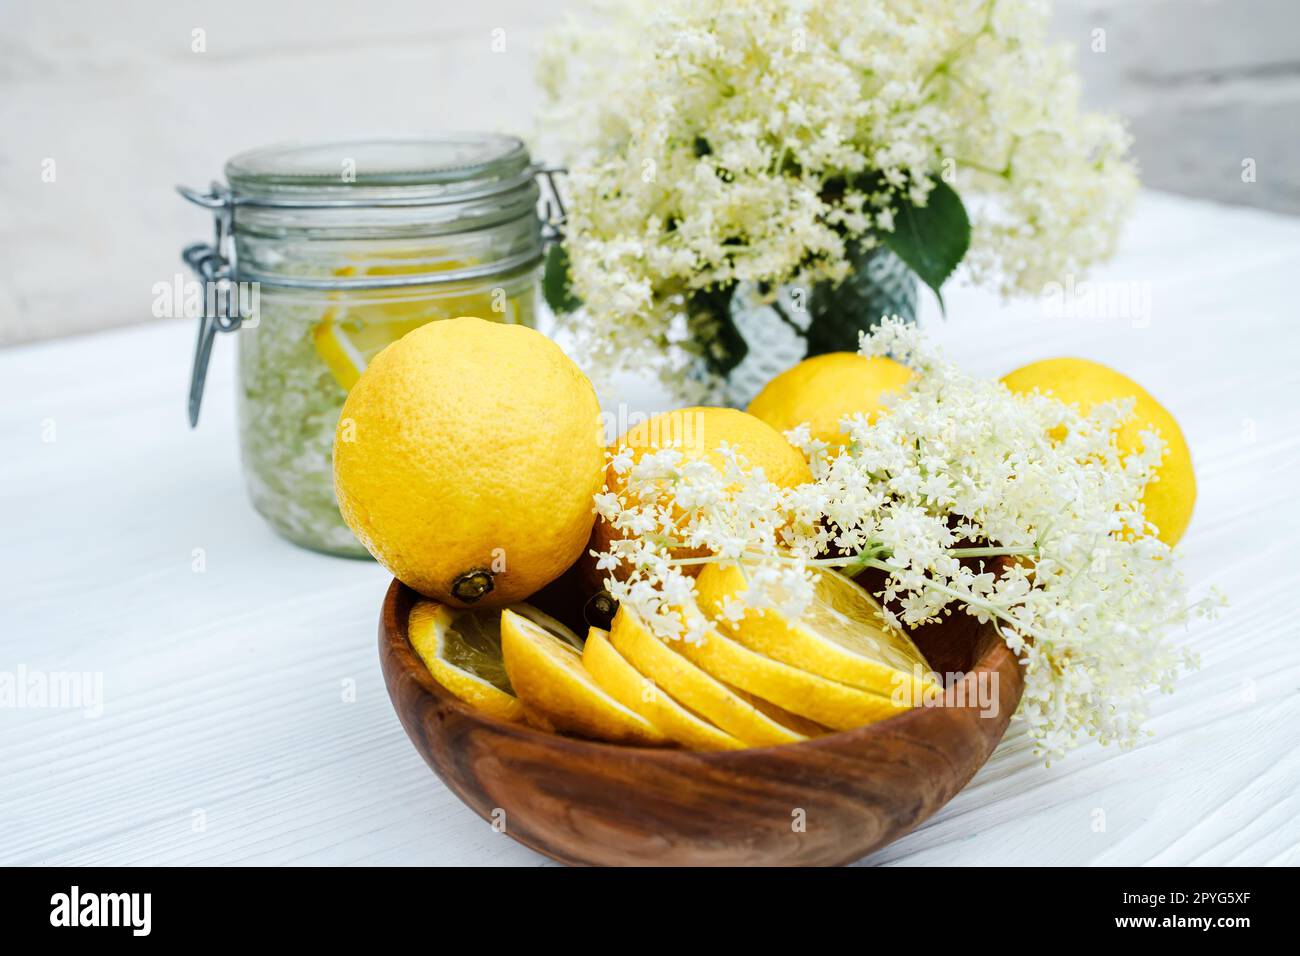 Slices of fresh lemon in a wooden plate. Ingredients for herbal tea from elder syrup. Snappy ambucus stalks ready to make a cold summer drink Stock Photo